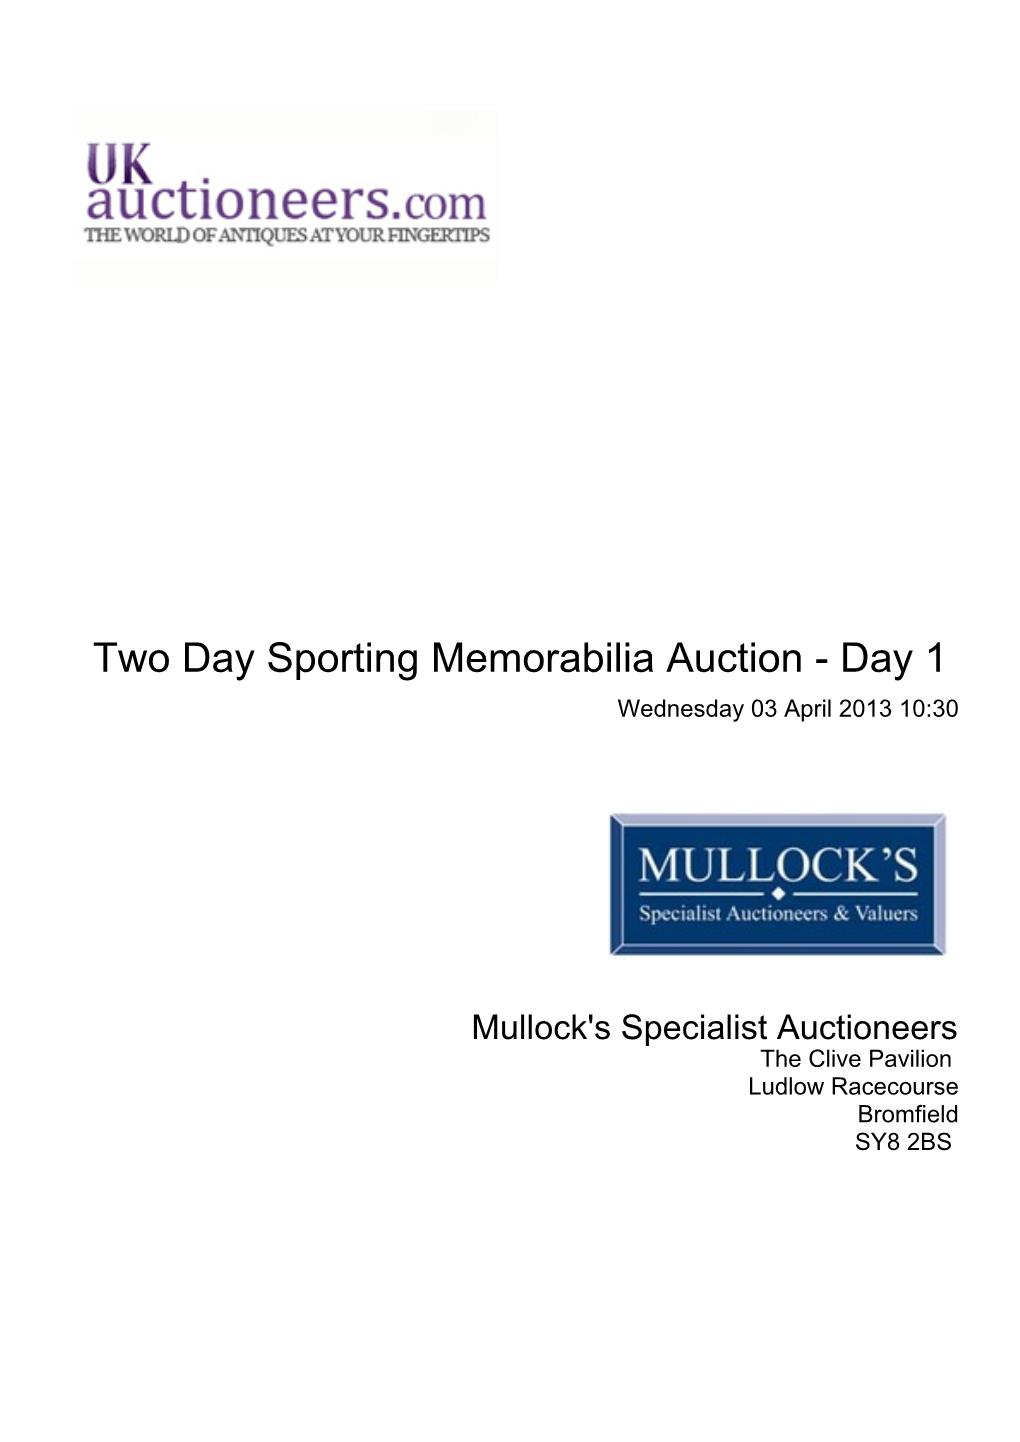 Two Day Sporting Memorabilia Auction - Day 1 Wednesday 03 April 2013 10:30